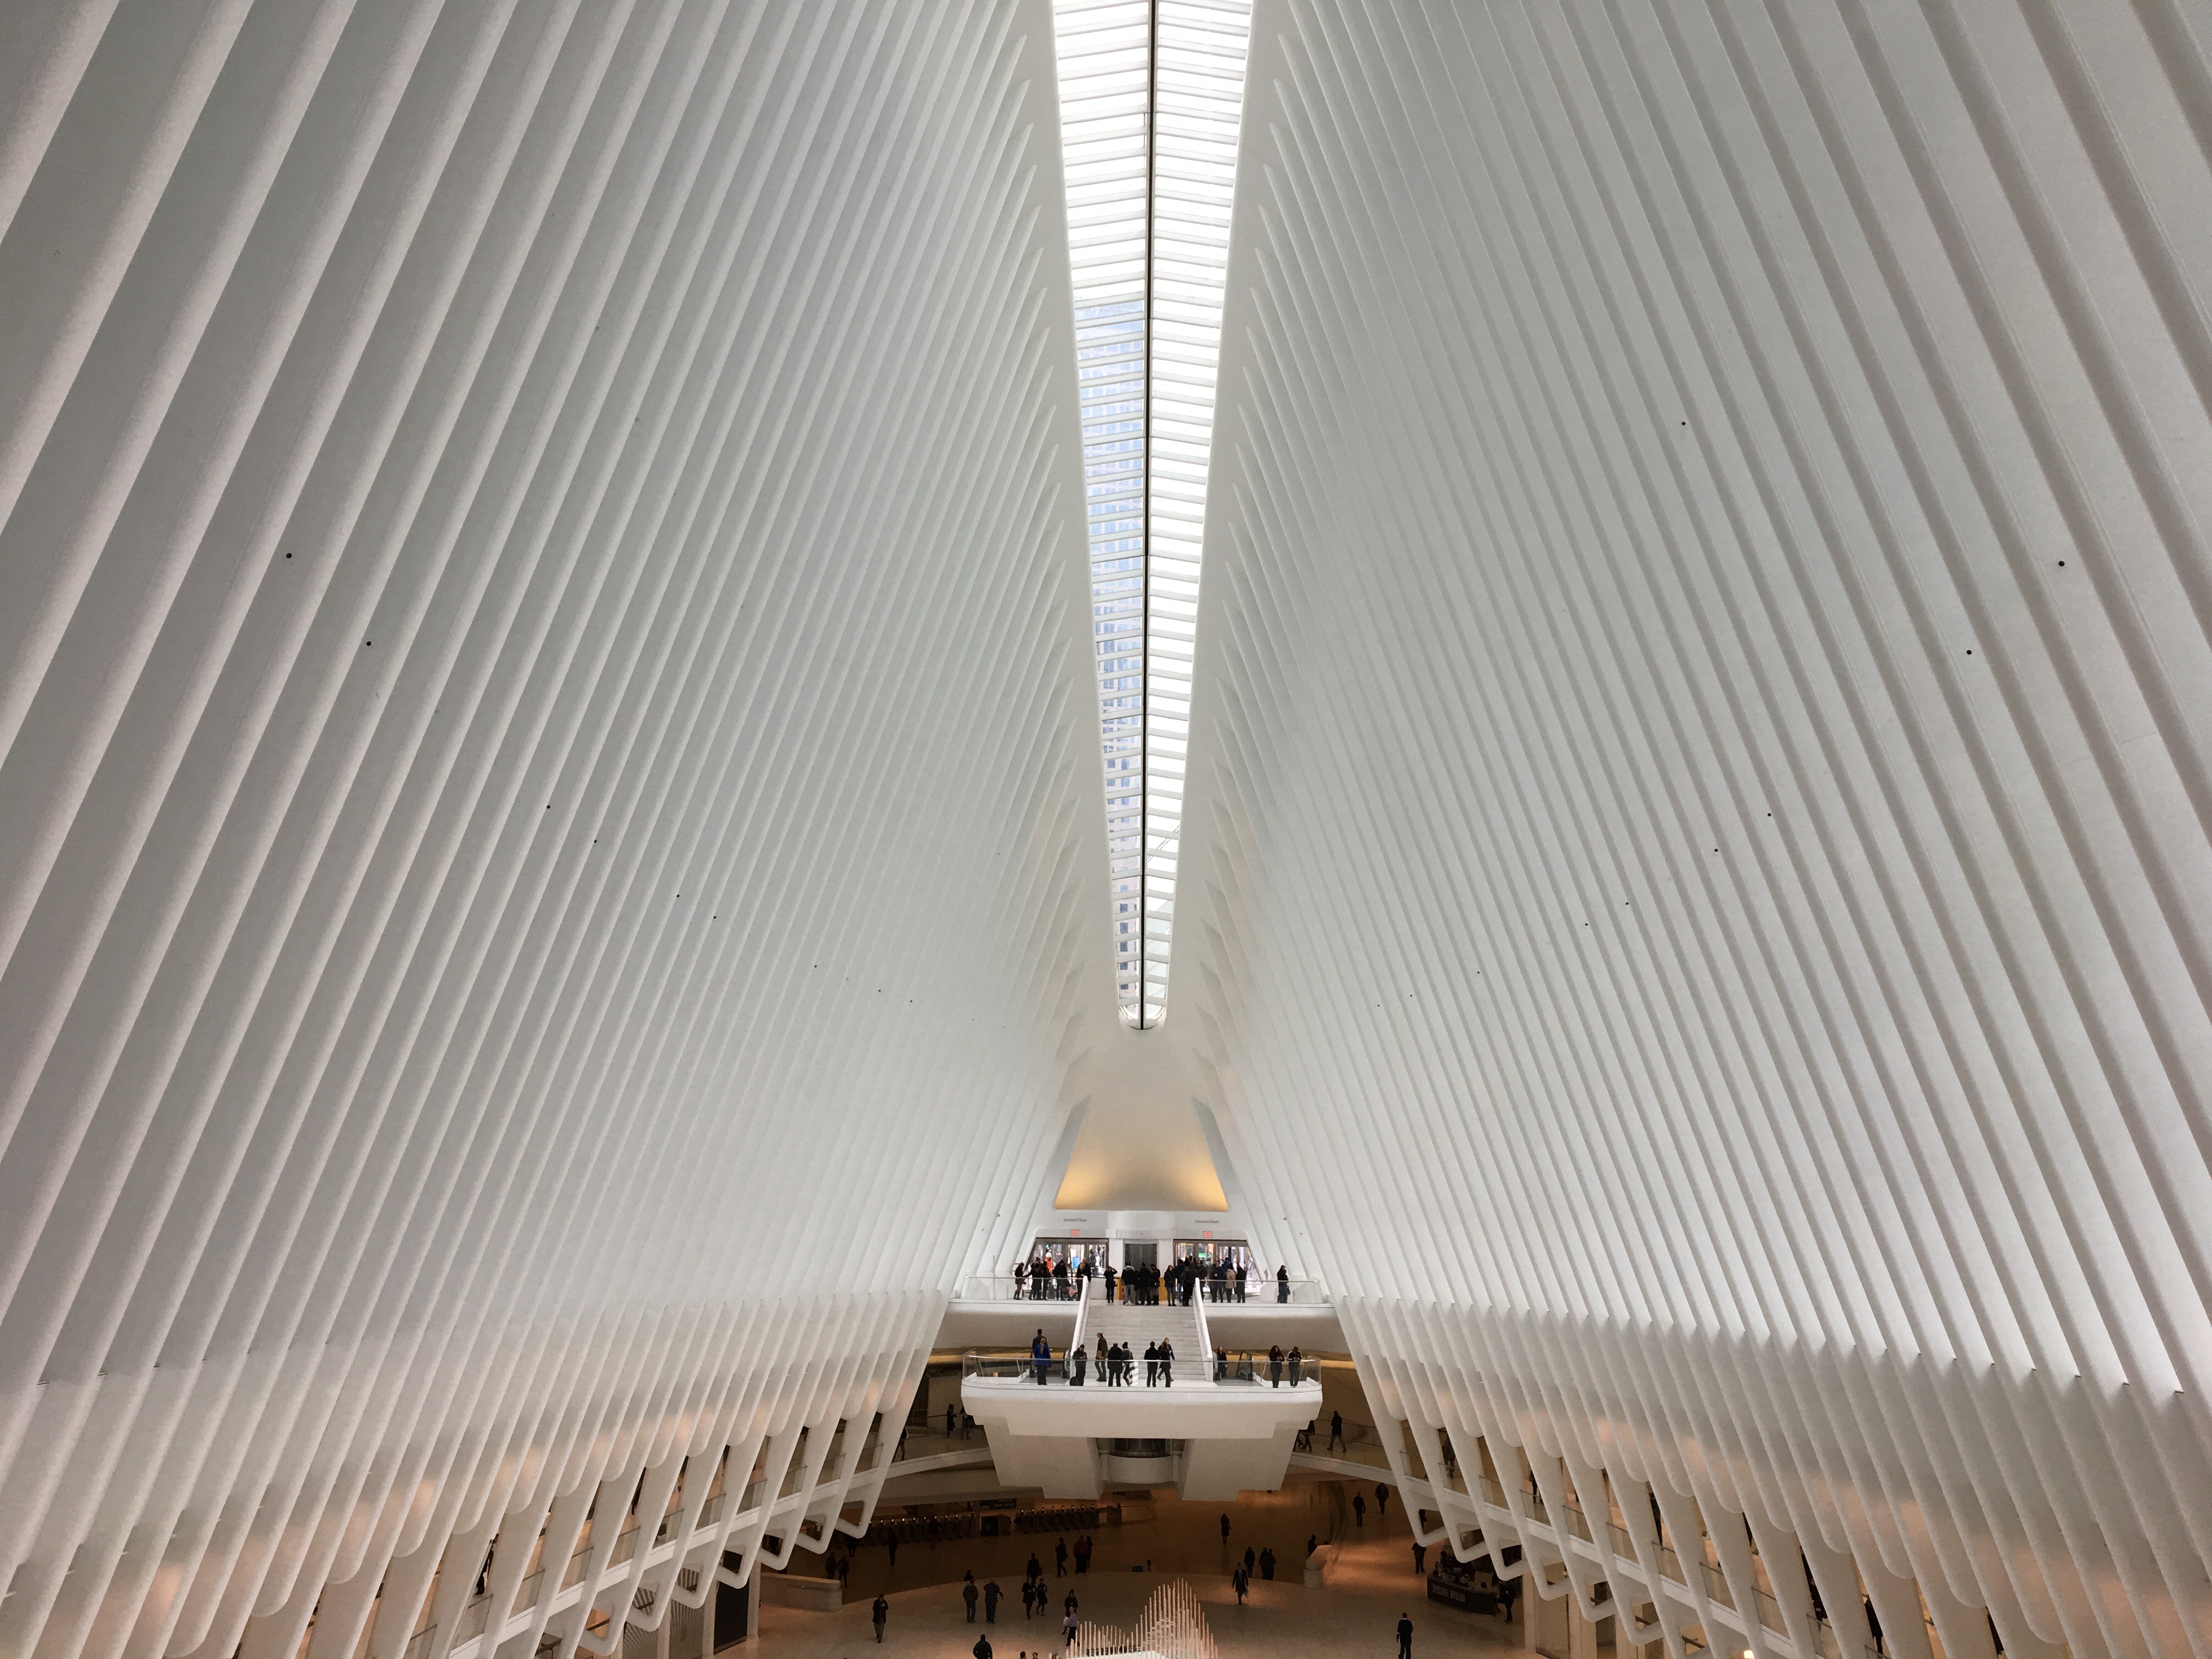 New York Times Travel Show - Oculus Building